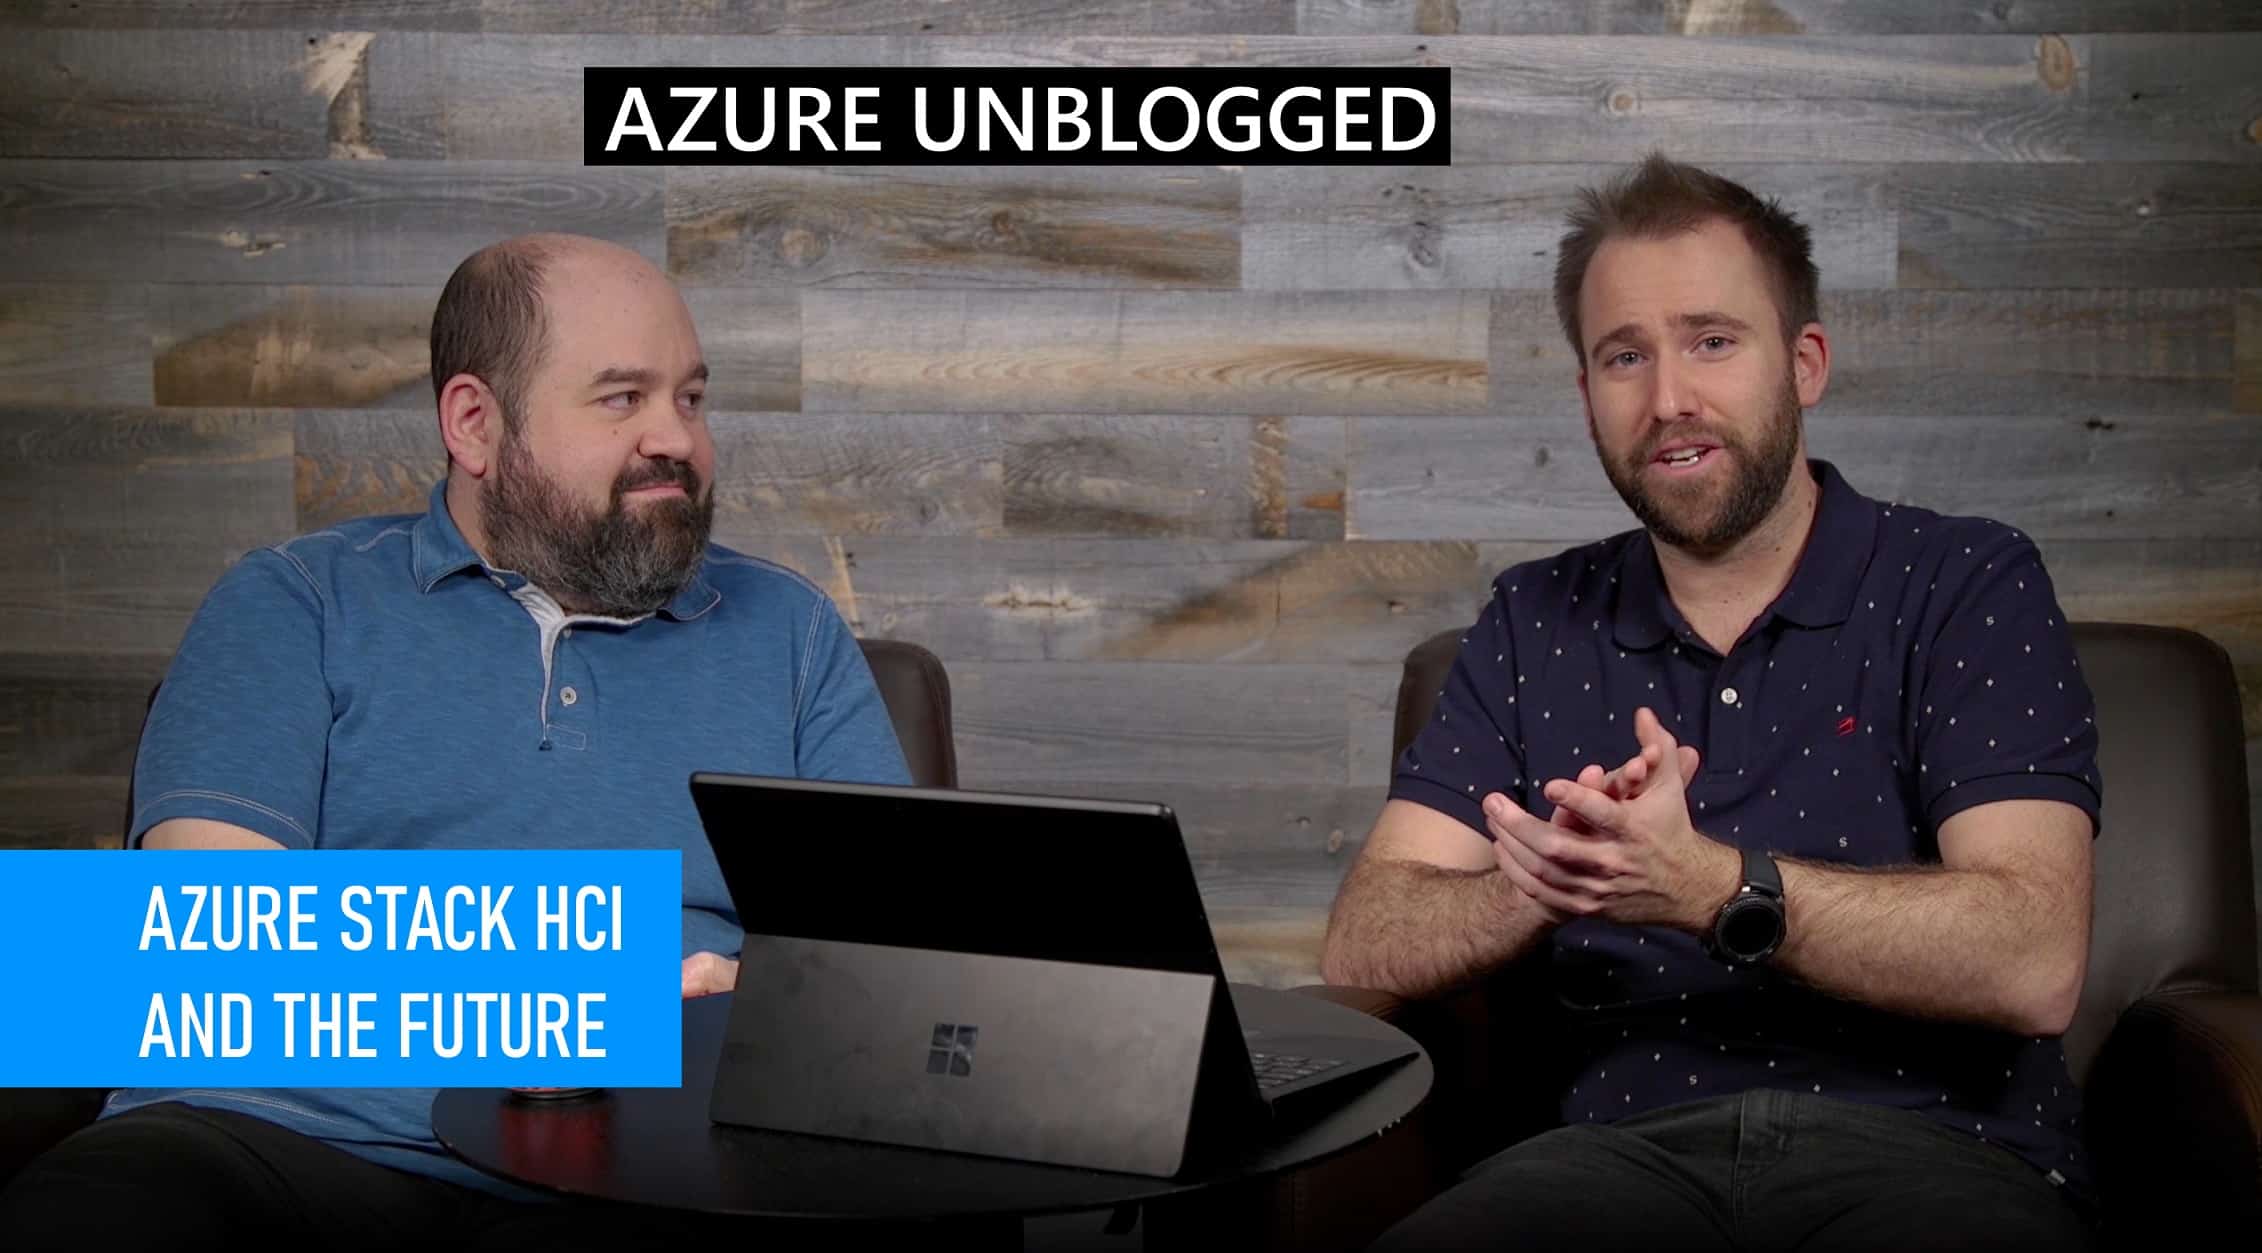 Azure Unblogged - Azure Stack HCI and the Future